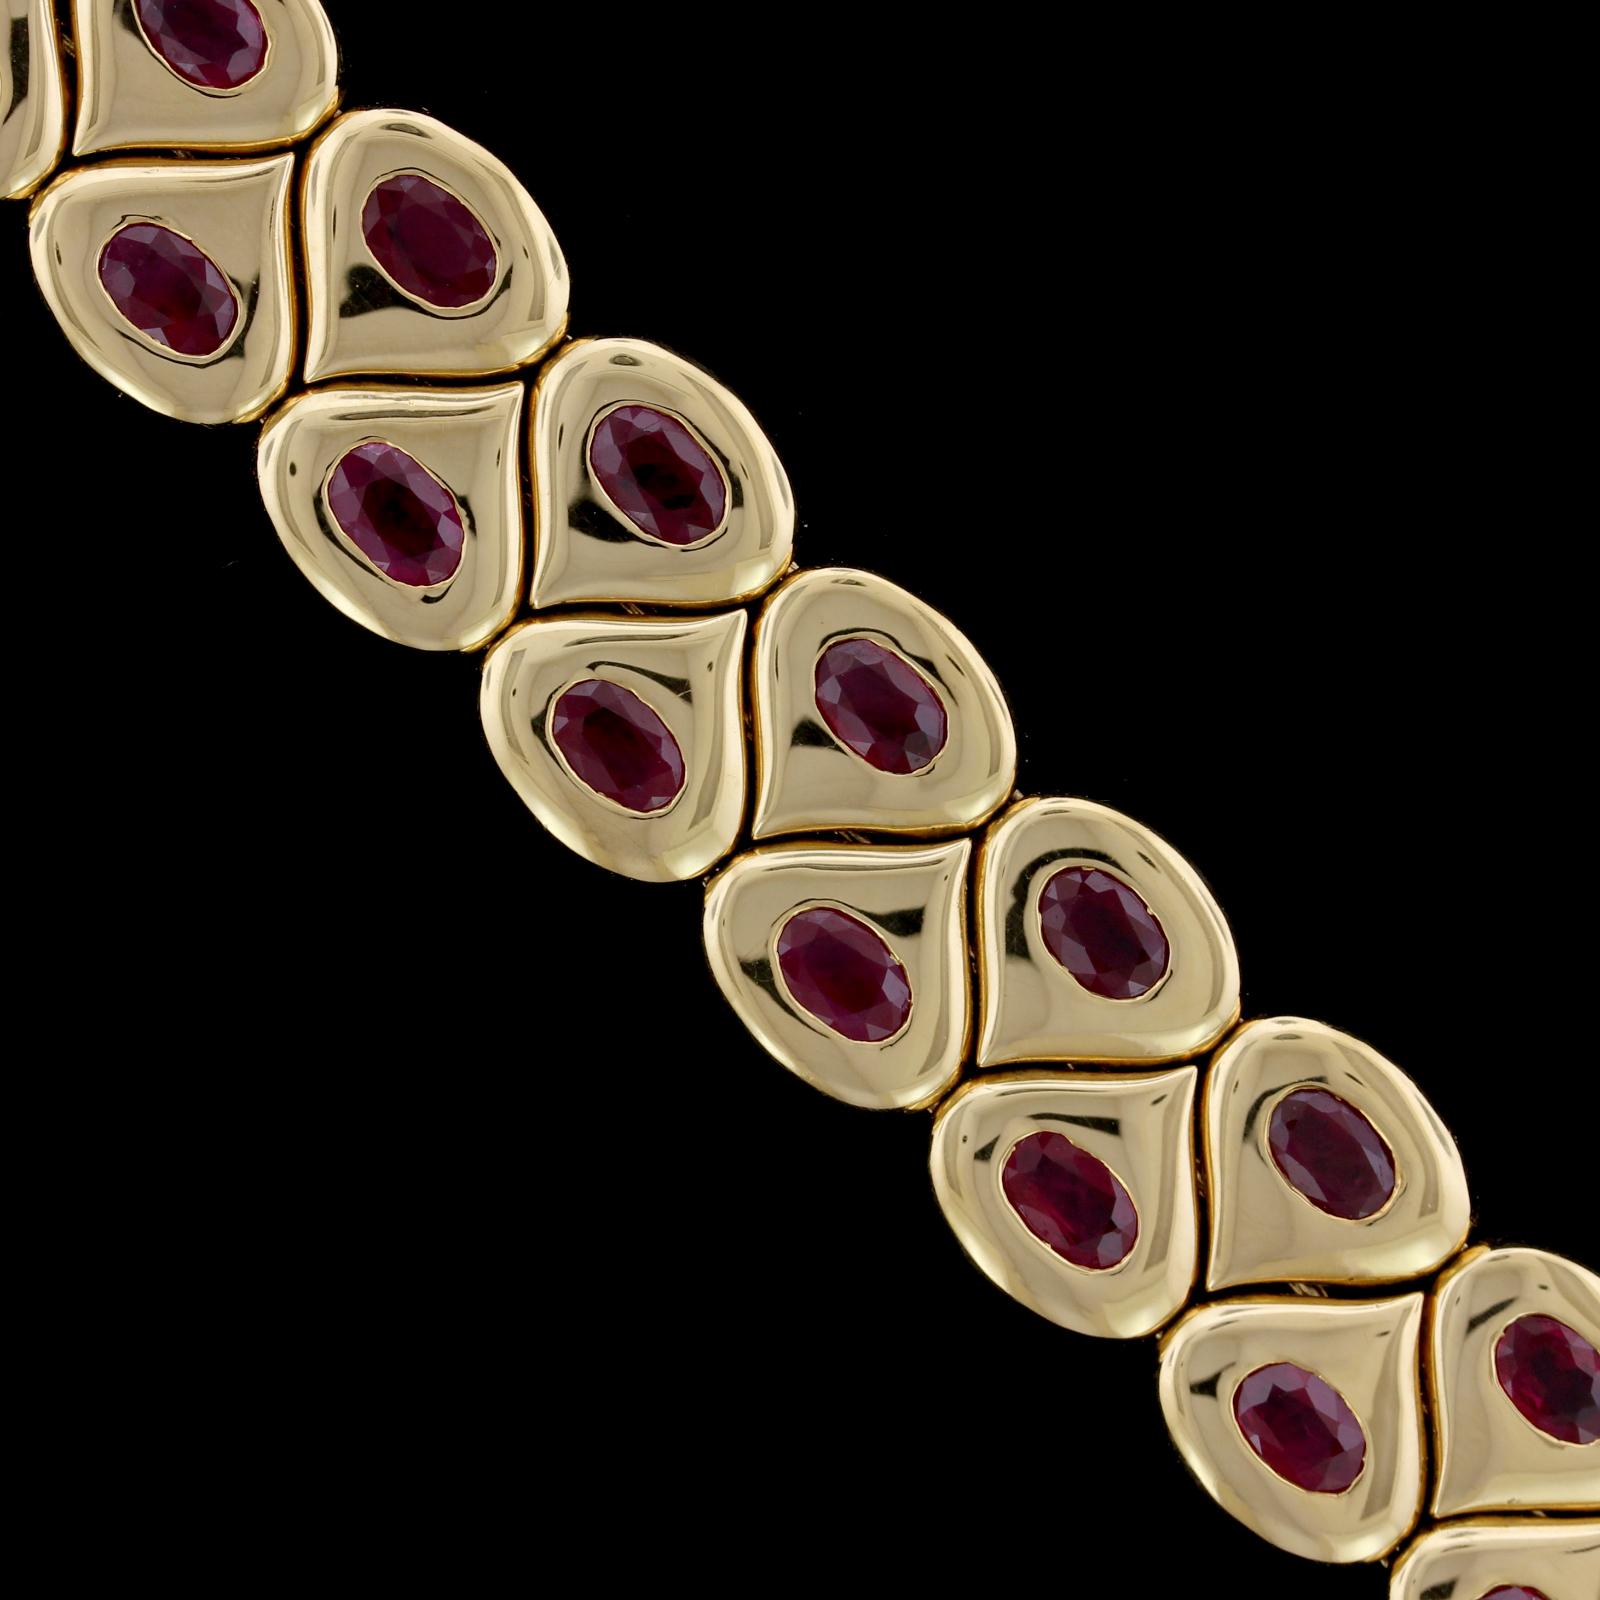 Chaumet 18K Yellow Gold Ruby Bracelet, Paris. The flexible polished link bracelet is flush set with 28 oval cut rubies, approx. total wt. 17.00cts., #163740, length 7